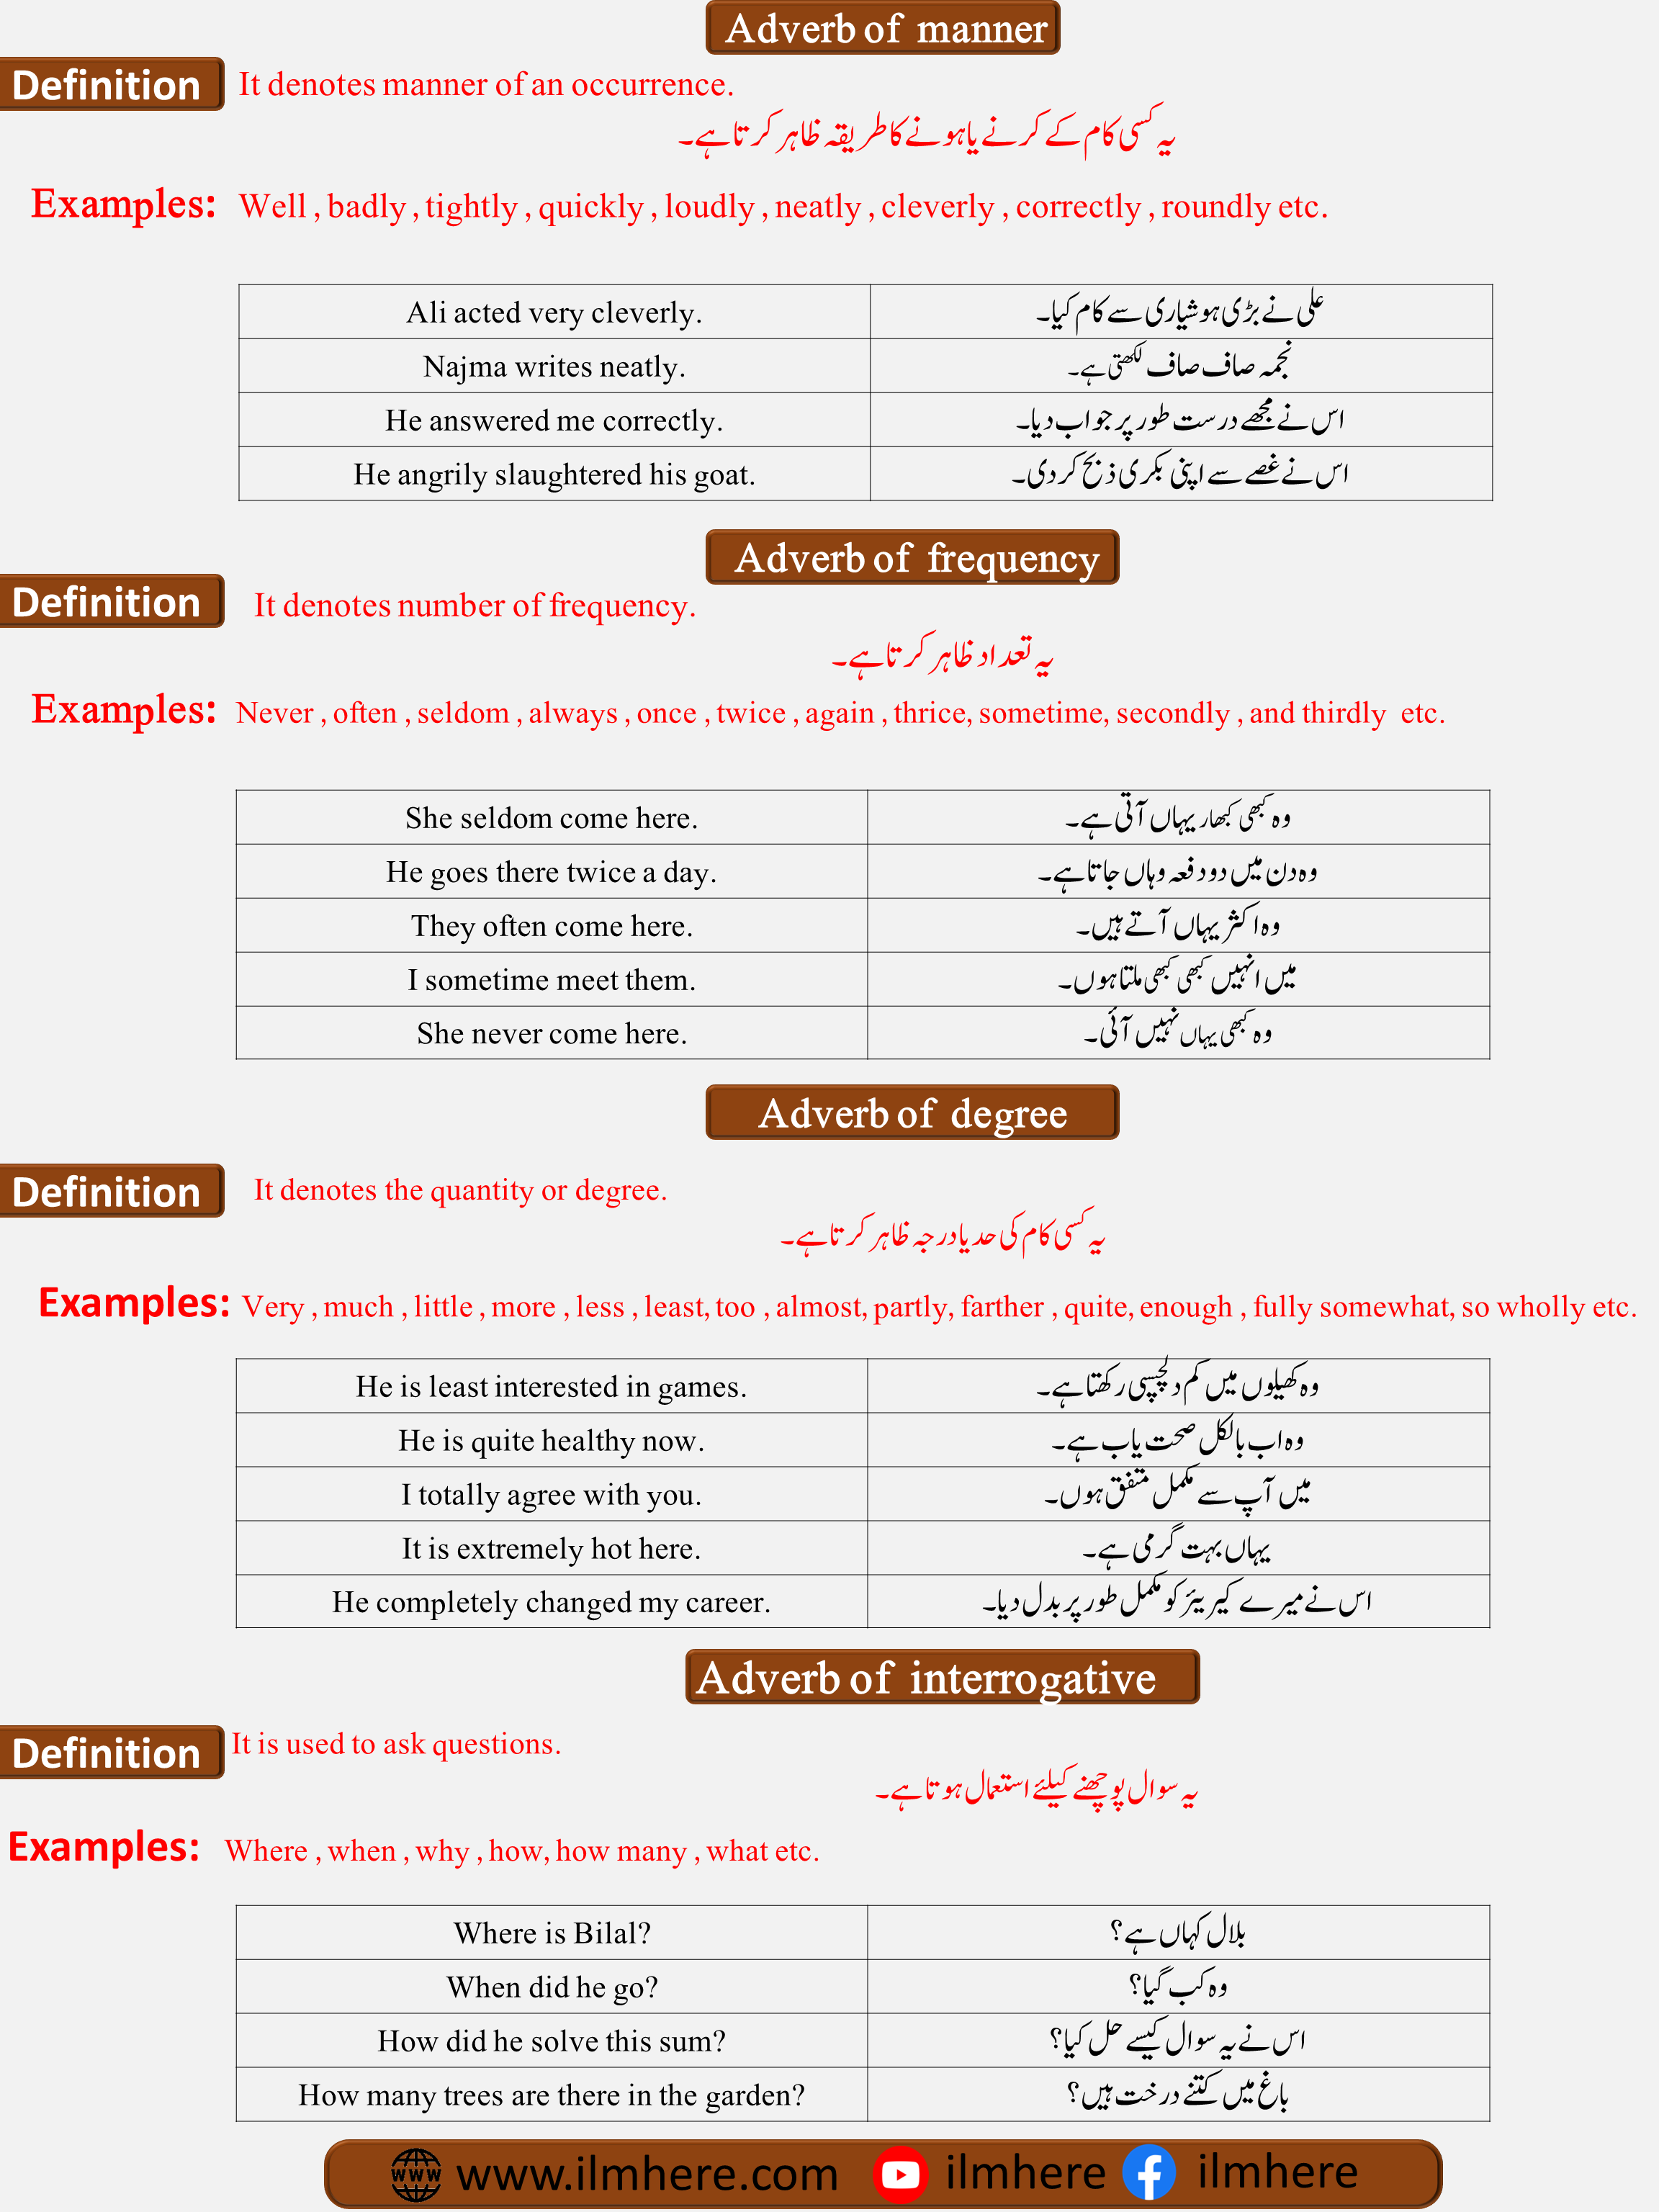 What is Adverb & Its Types of Adverb in Urdu and English\Hindi With Examples